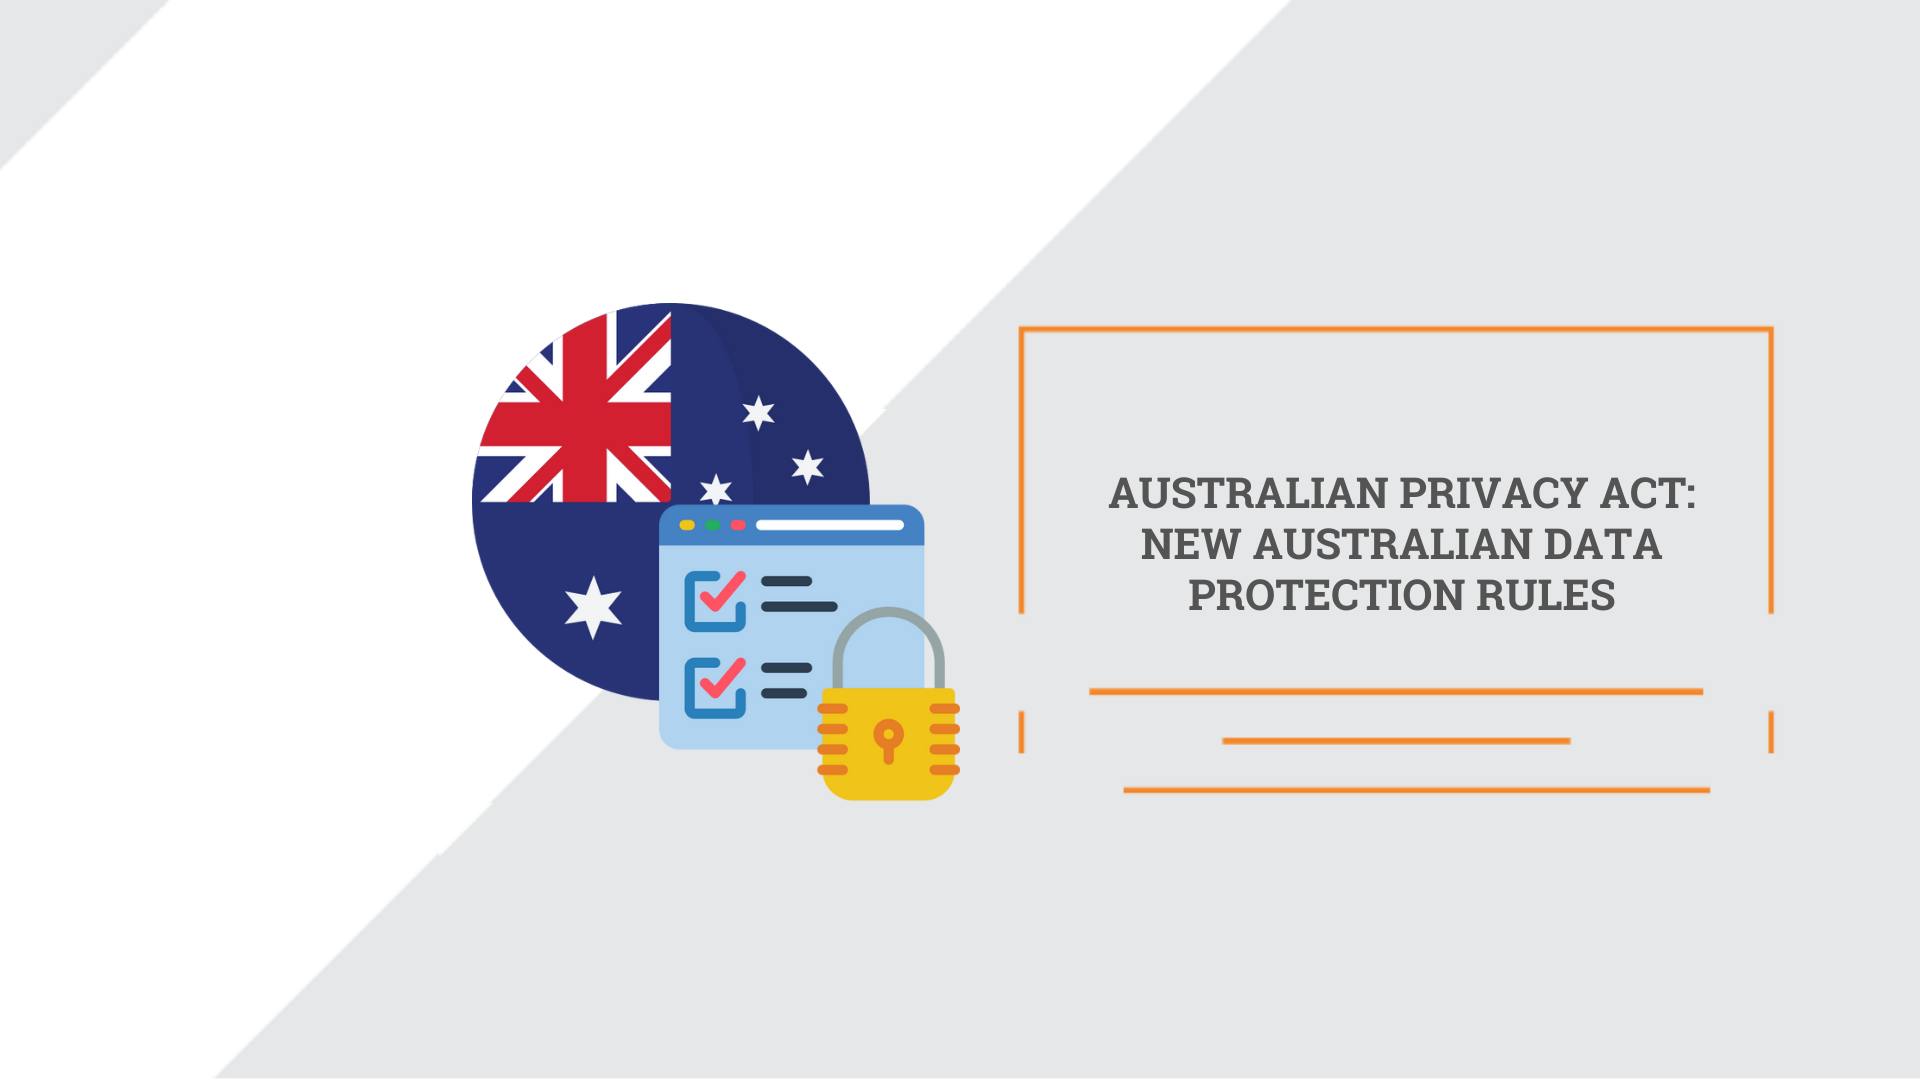 Australian Privacy Act. New Australian data protection rules.